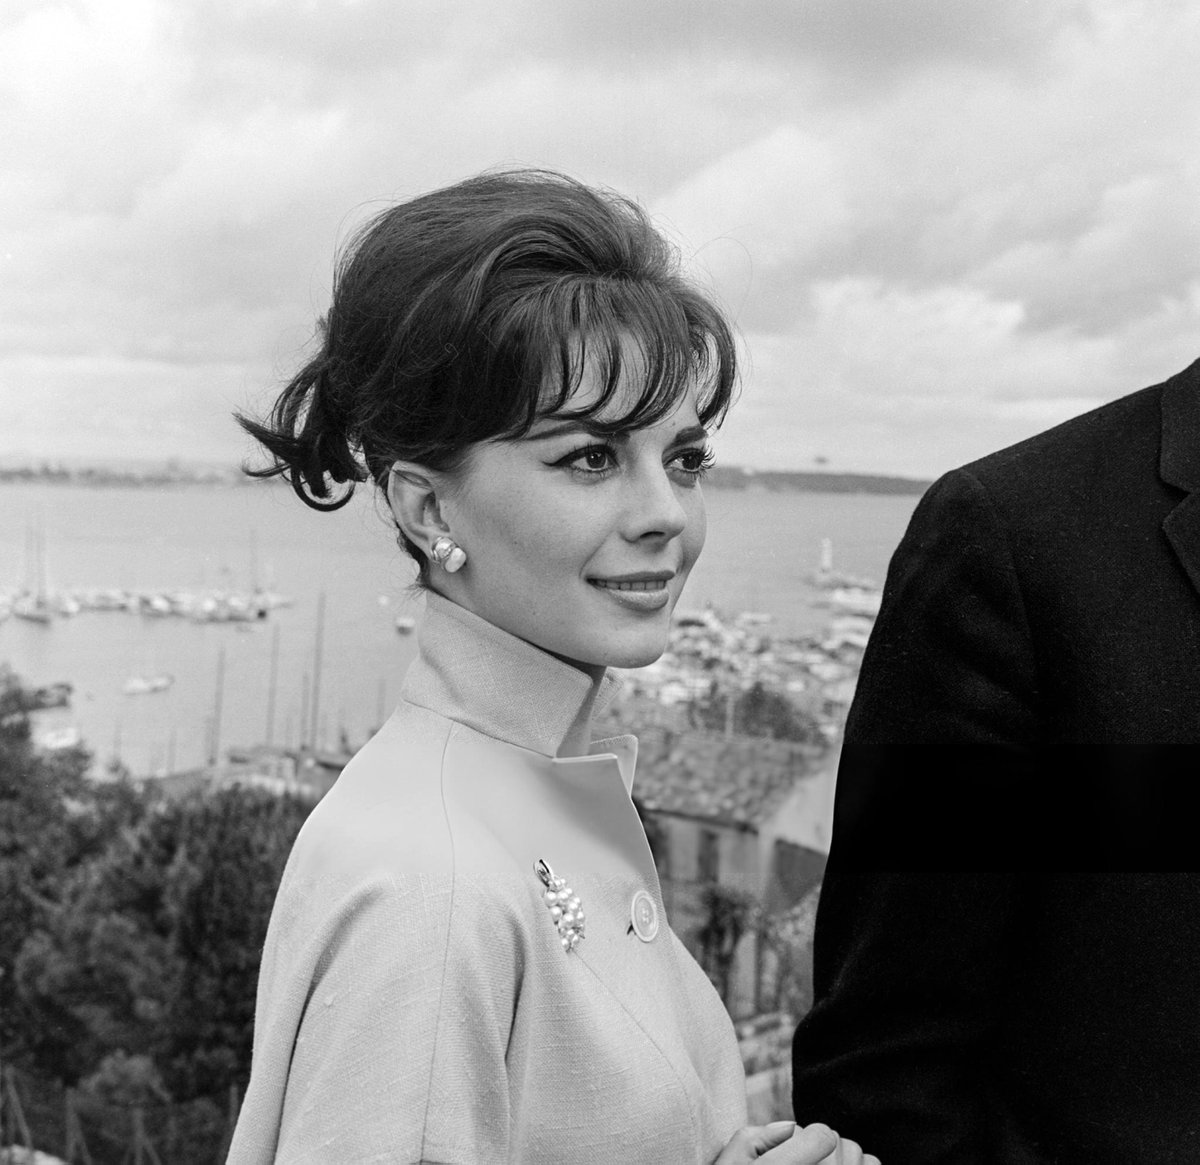 Natalie Wood at the 15th Cannes Film Festival in May, 1962. Photo by Daniel Fallot.